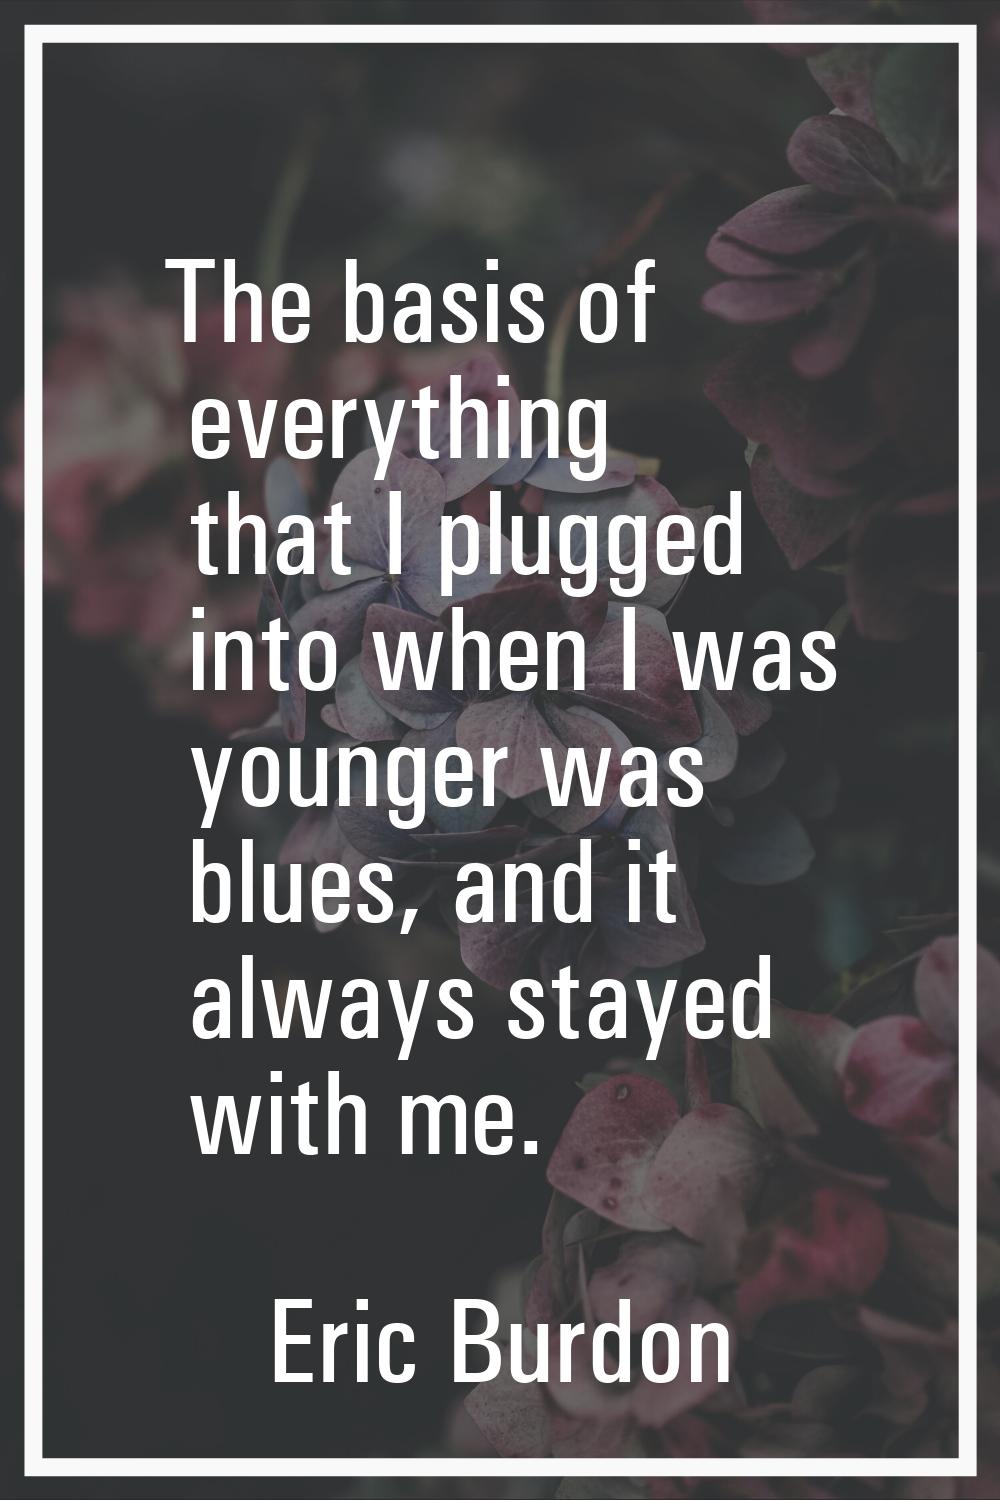 The basis of everything that I plugged into when I was younger was blues, and it always stayed with